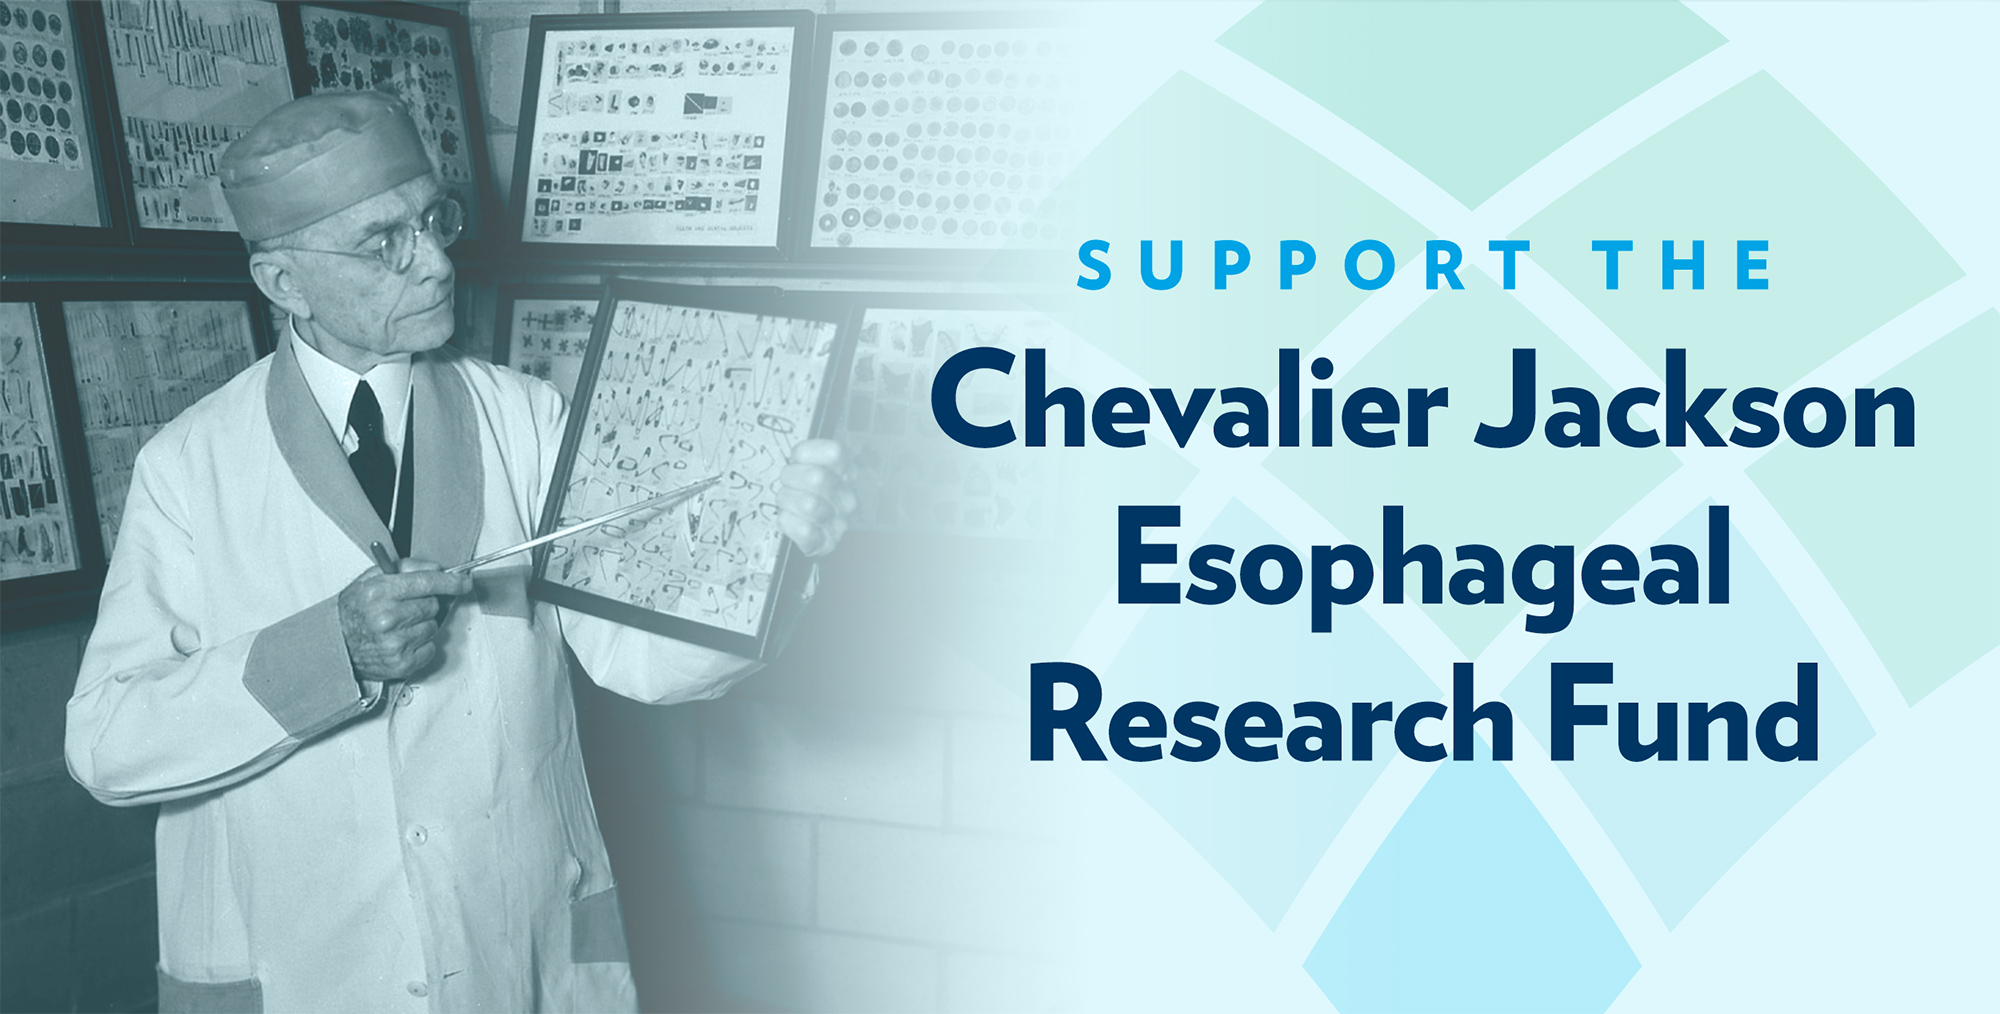 Support the Chevalier Jackson Esophageal Research Fund